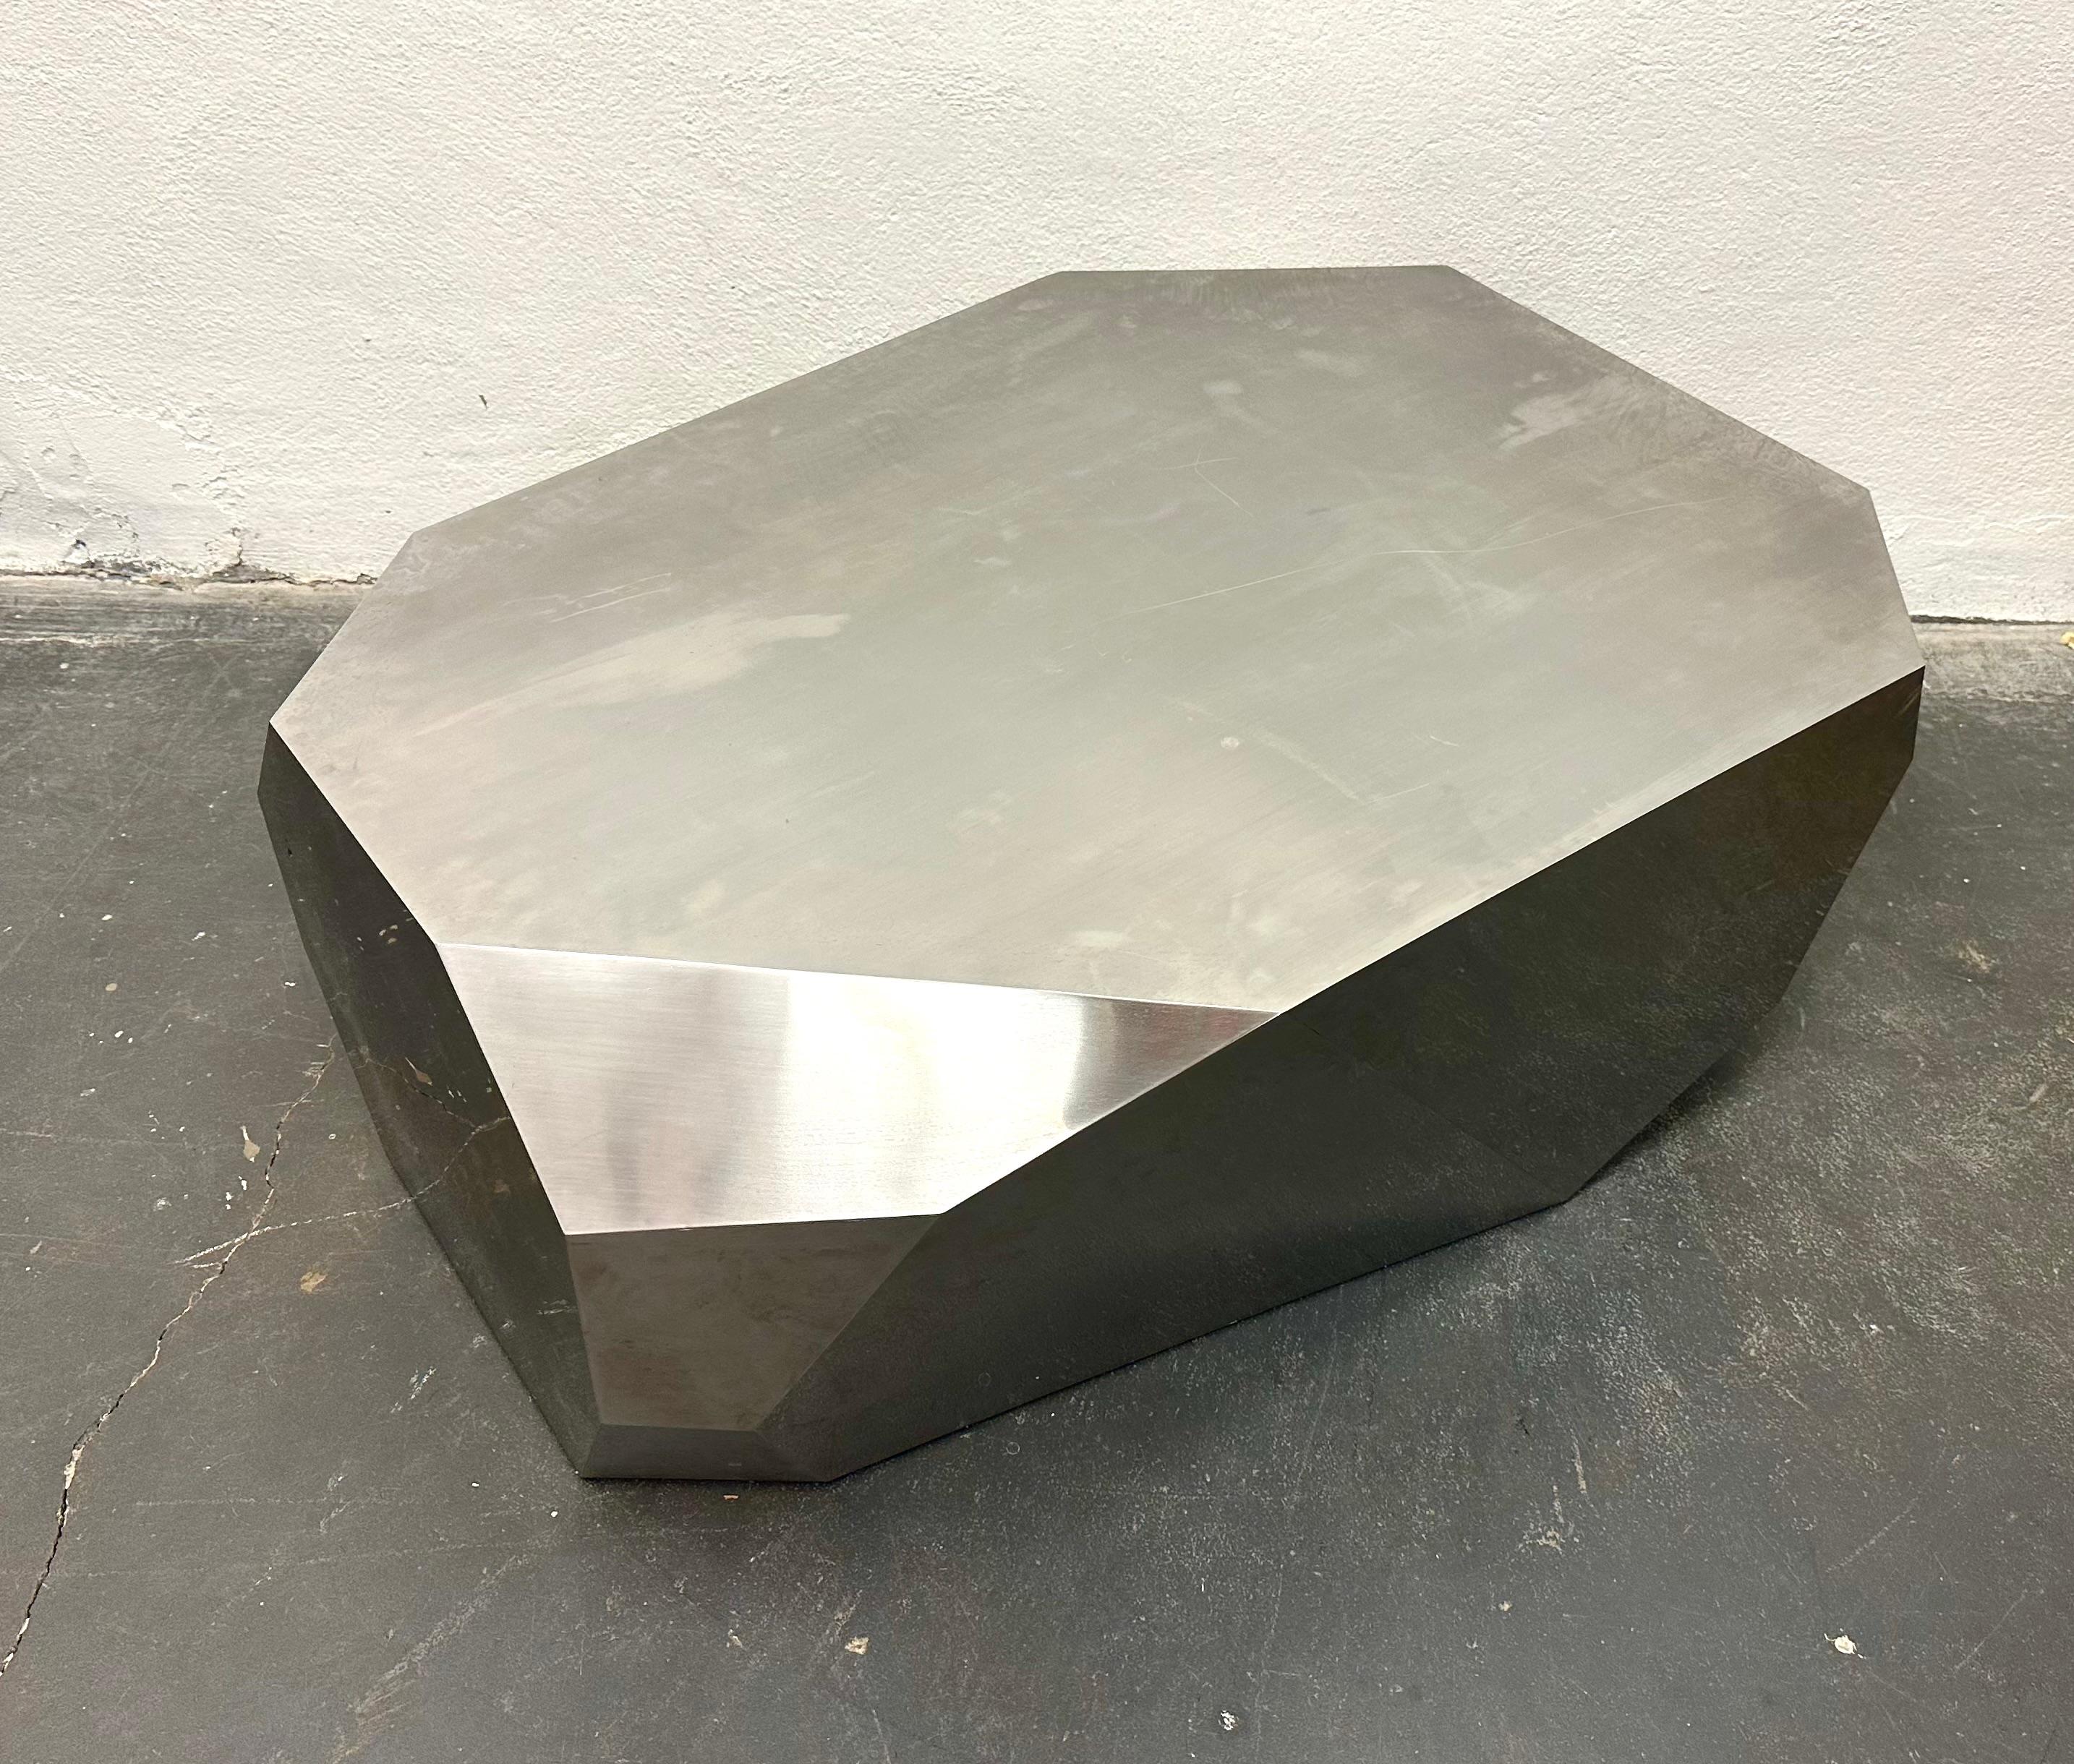 Earthy yet futuristic brushed steel-clad coffee or occasional table or bench. Very well constructed with invisible seams.